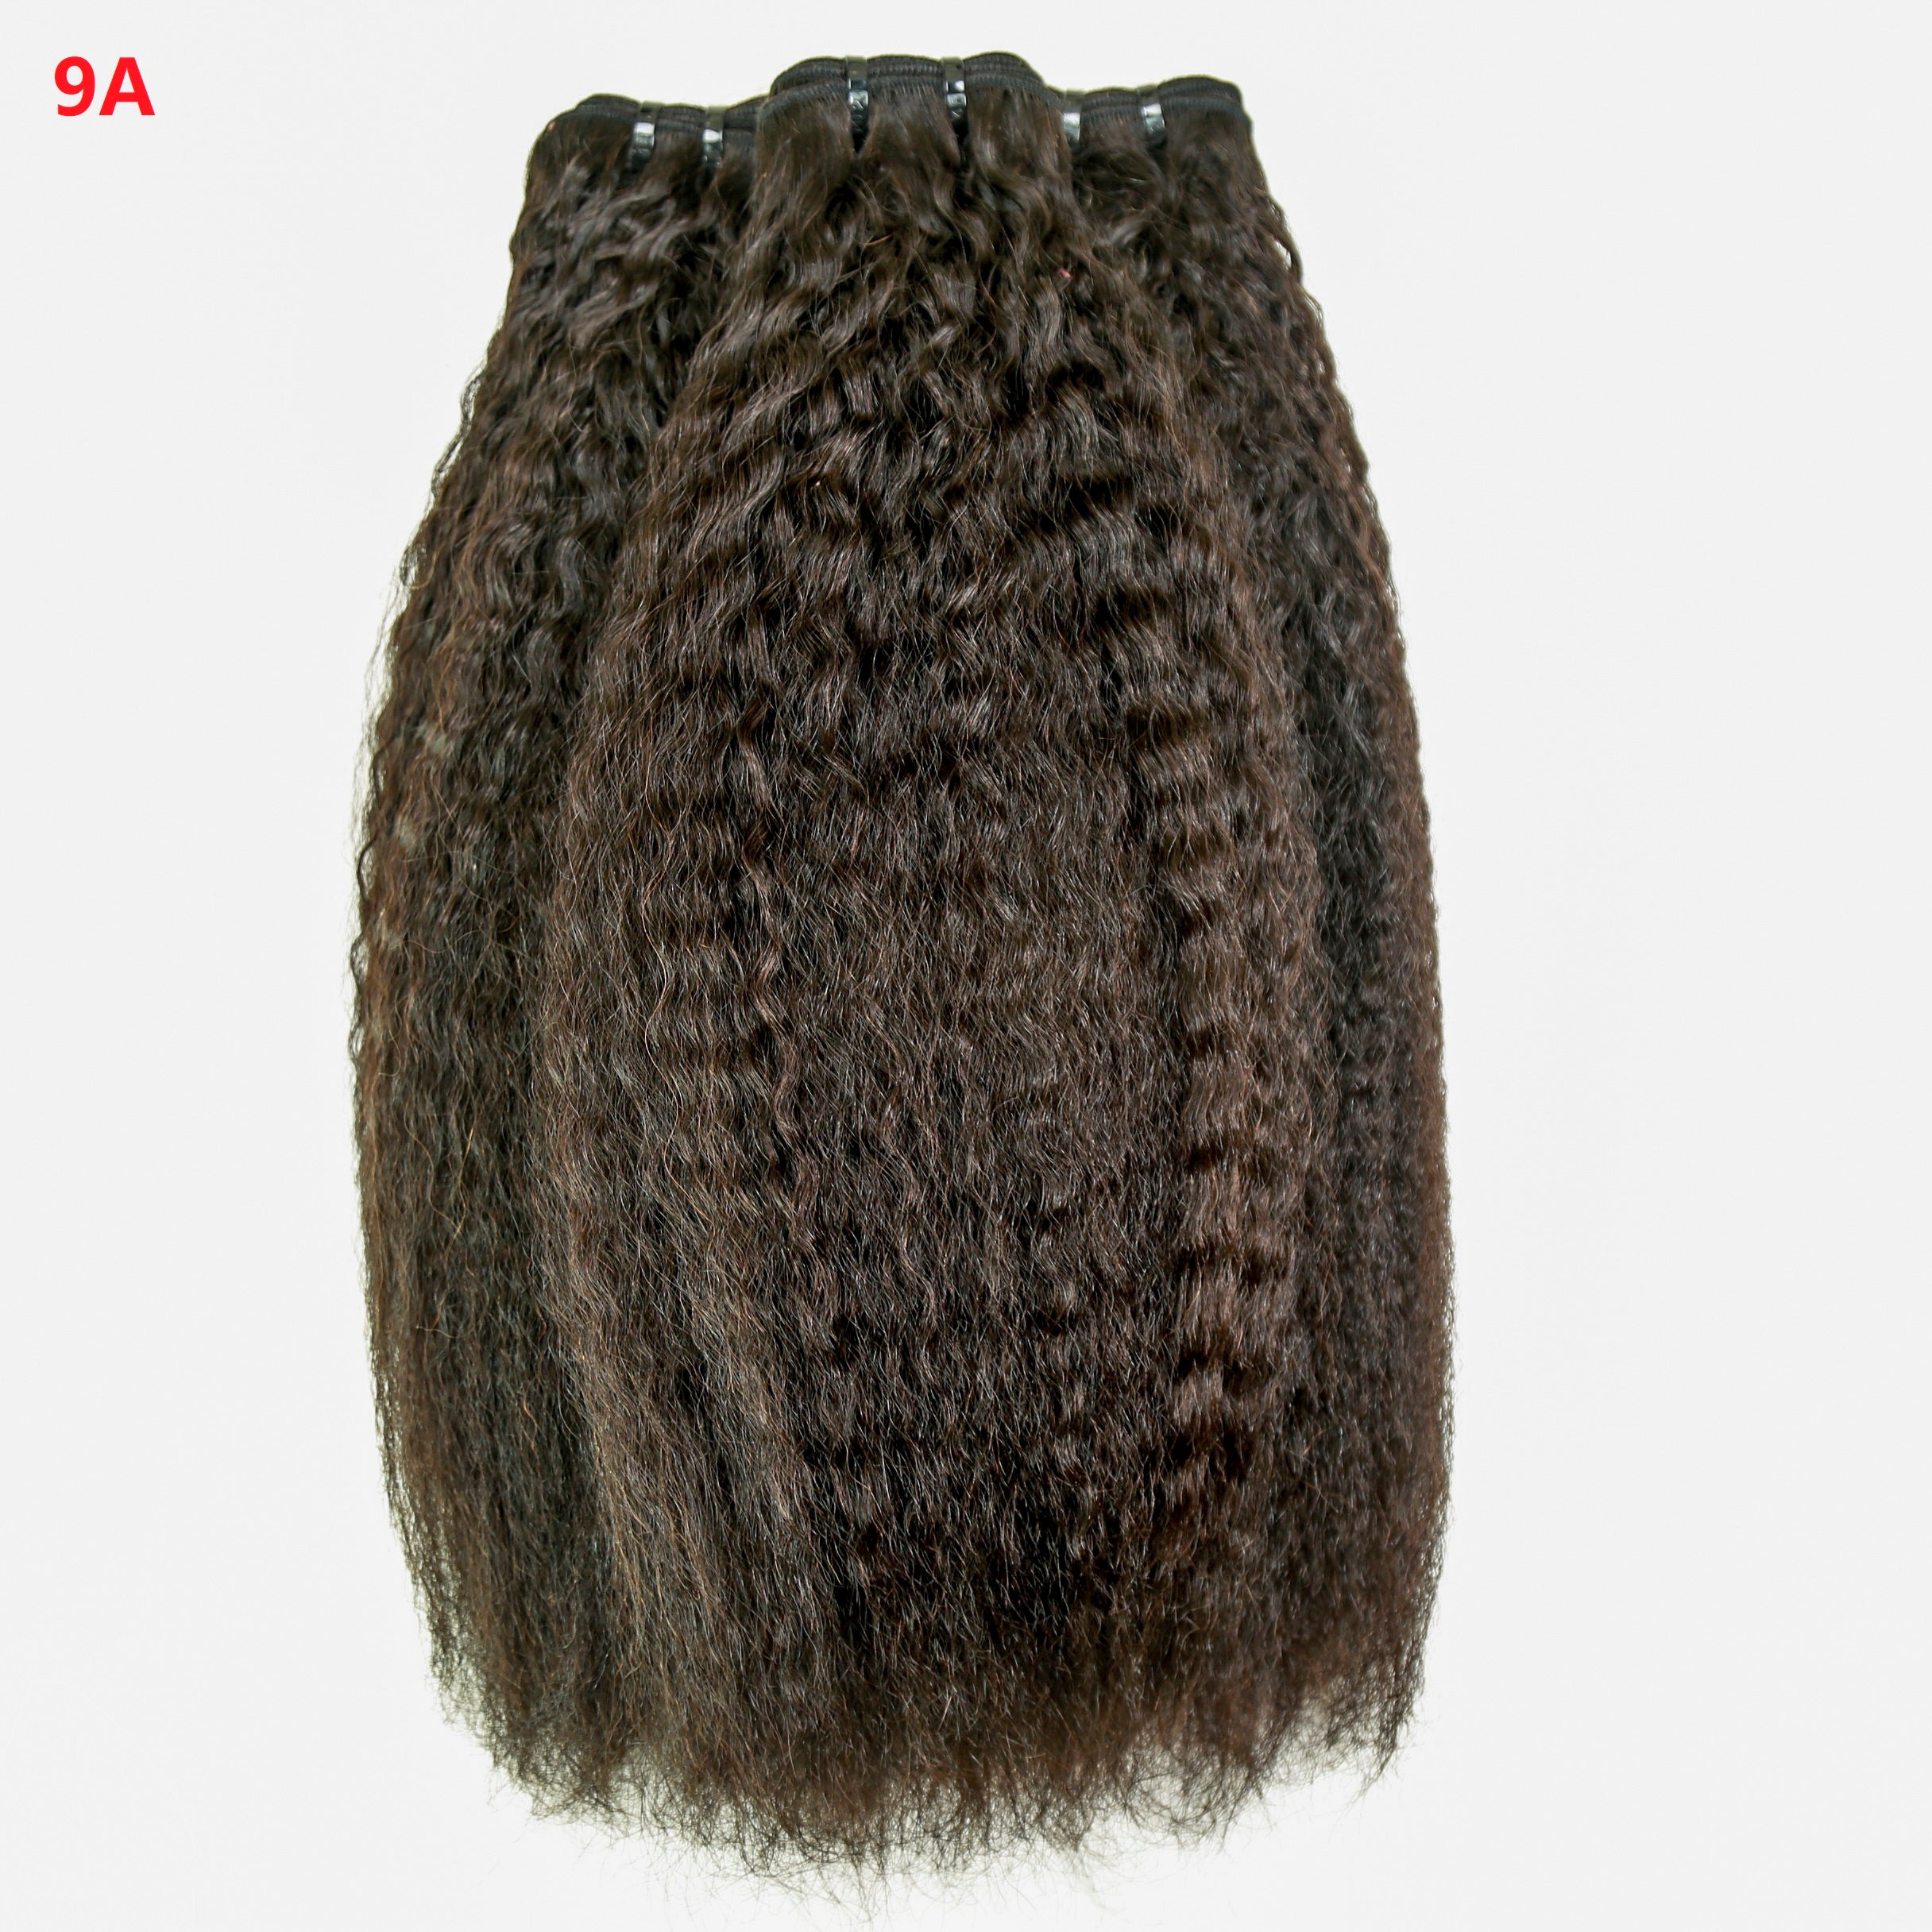 XBL Hair 9A/10A/12A Kinky Straight 3 Bundles with 13x6 Frontal with Preplucked Hairline